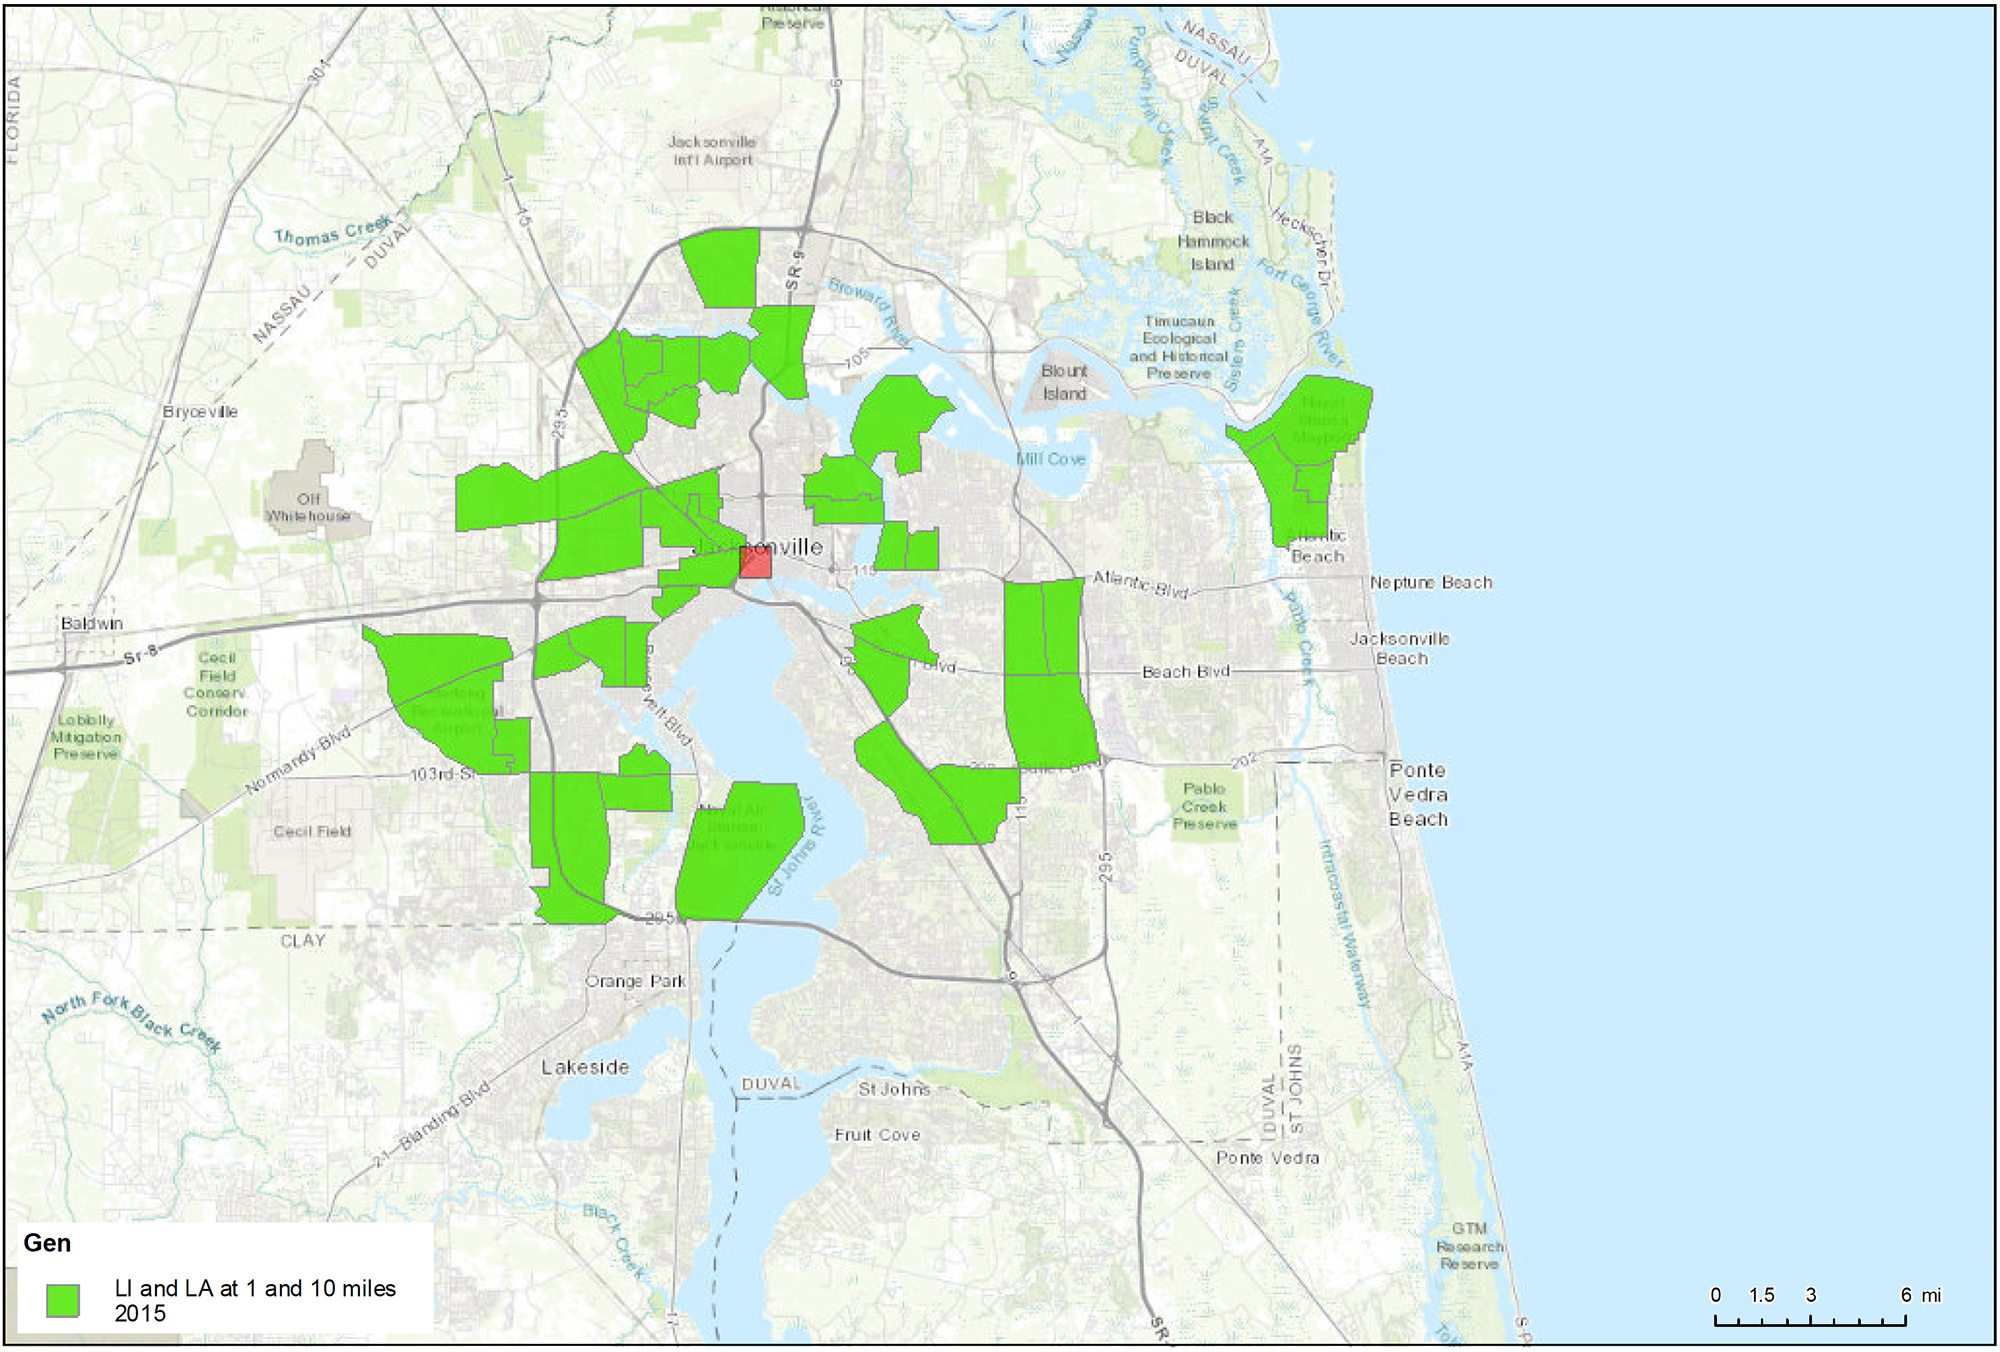 A map of Northeast Florida food deserts according to the U.S. Department of Agriculture.